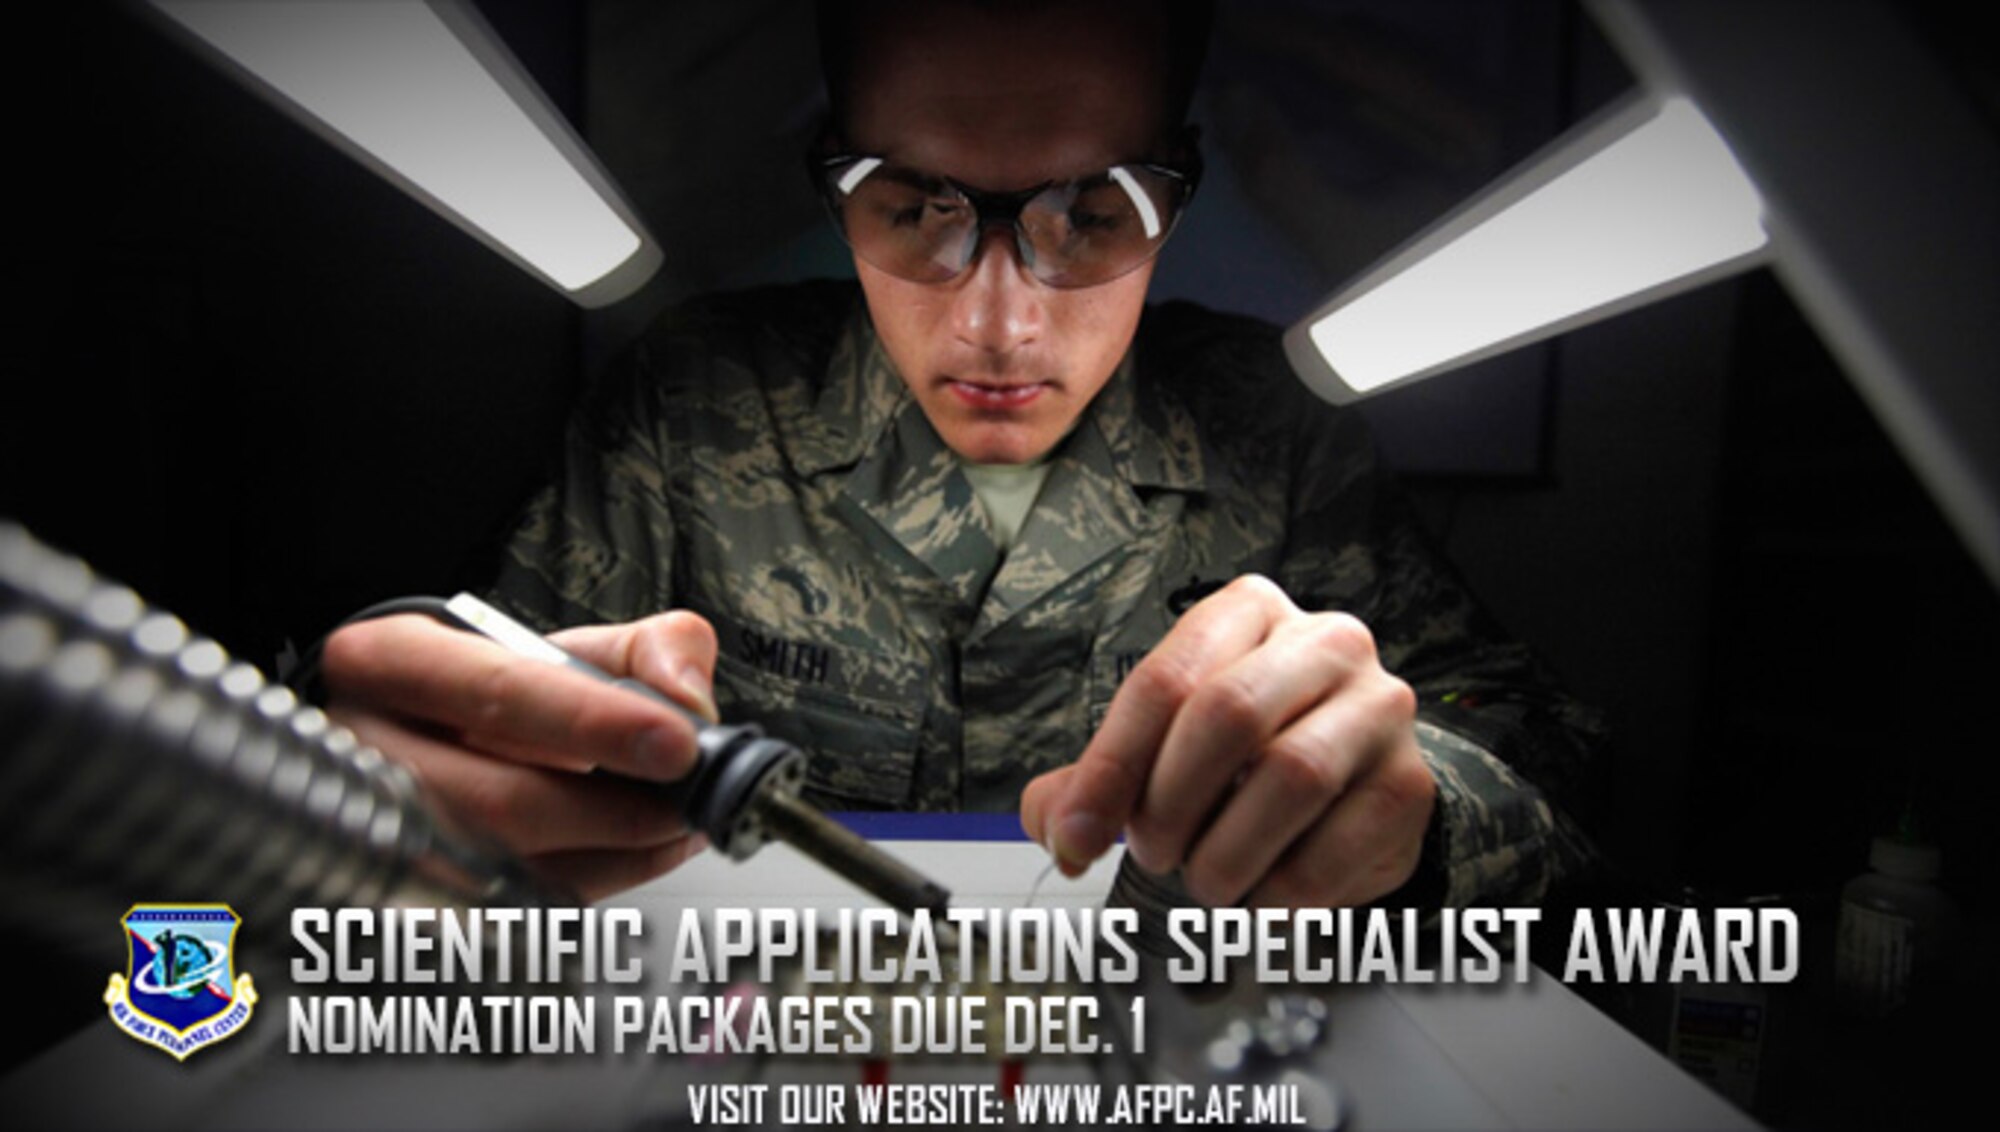 The 2016 Scientific Applications Specialist Award nomination packages are due to the Air Force Personnel Center no later than Dec. 1. This awards program recognizes the Outstanding Air Force Scientific Applications Specialist in three distinct categories: technician, supervisor and manager. (U.S. Air Force courtesy photo) 